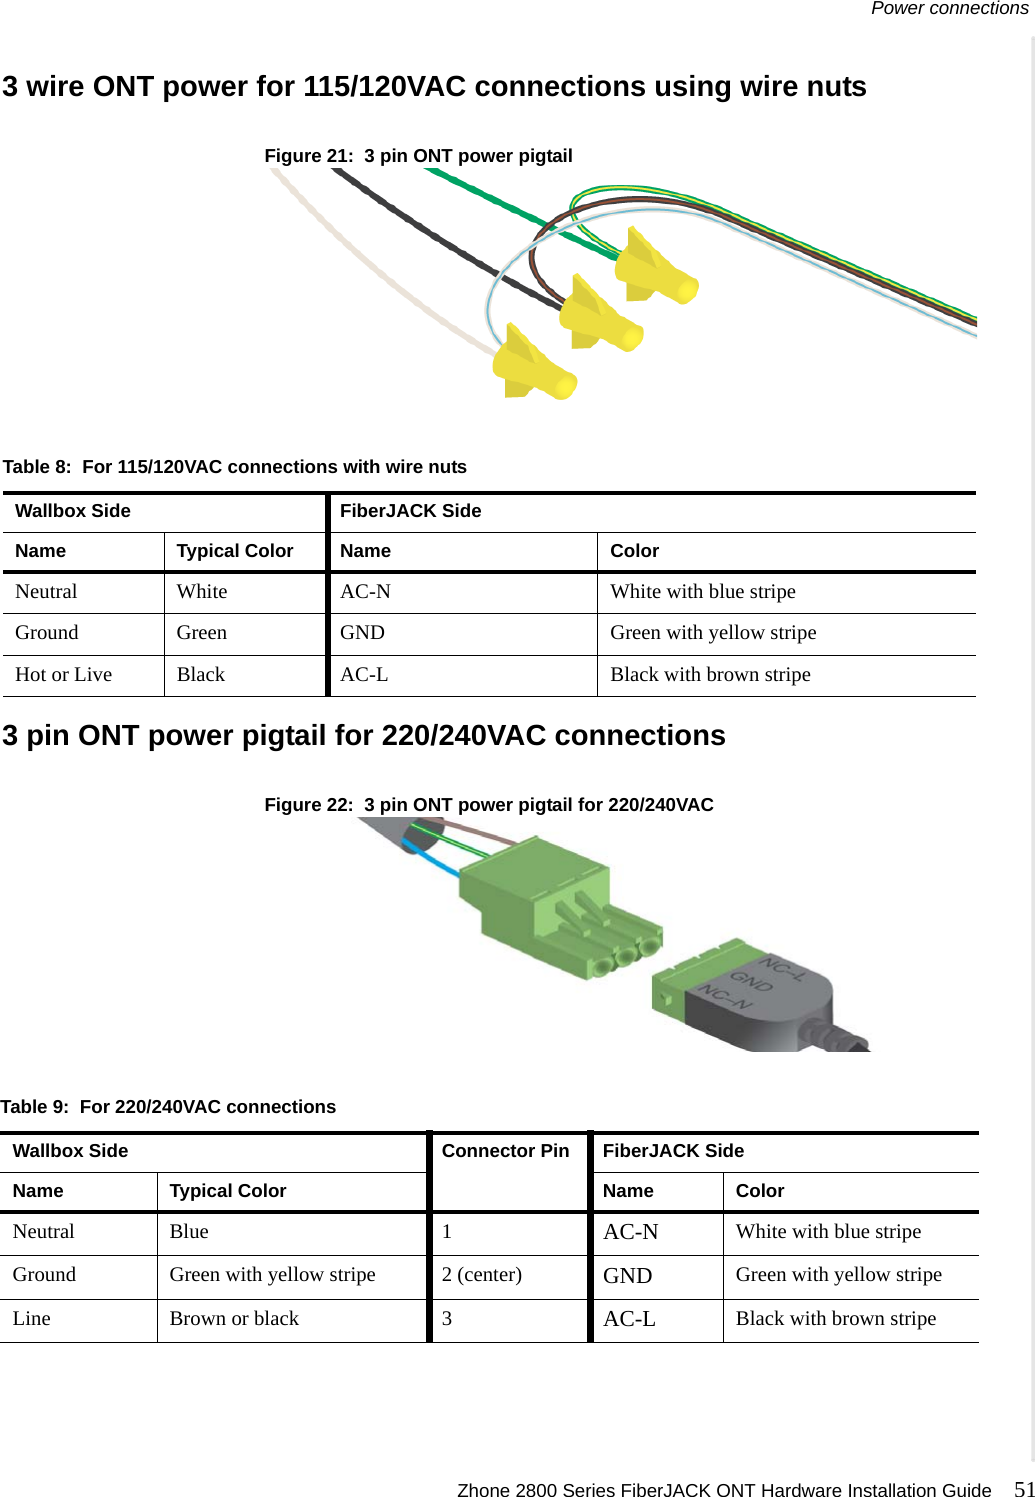 Power connections Zhone 2800 Series FiberJACK ONT Hardware Installation Guide 51  3 wire ONT power for 115/120VAC connections using wire nutsFigure 21:  3 pin ONT power pigtail3 pin ONT power pigtail for 220/240VAC connectionsFigure 22:  3 pin ONT power pigtail for 220/240VACTable 8:  For 115/120VAC connections with wire nutsWallbox Side FiberJACK SideName Typical Color Name ColorNeutral White AC-N White with blue stripeGround Green GND Green with yellow stripeHot or Live Black AC-L Black with brown stripeTable 9:  For 220/240VAC connectionsWallbox Side Connector Pin FiberJACK SideName Typical Color Name ColorNeutral Blue 1 AC-N White with blue stripeGround Green with yellow stripe 2 (center) GND Green with yellow stripeLine Brown or black 3 AC-L Black with brown stripe